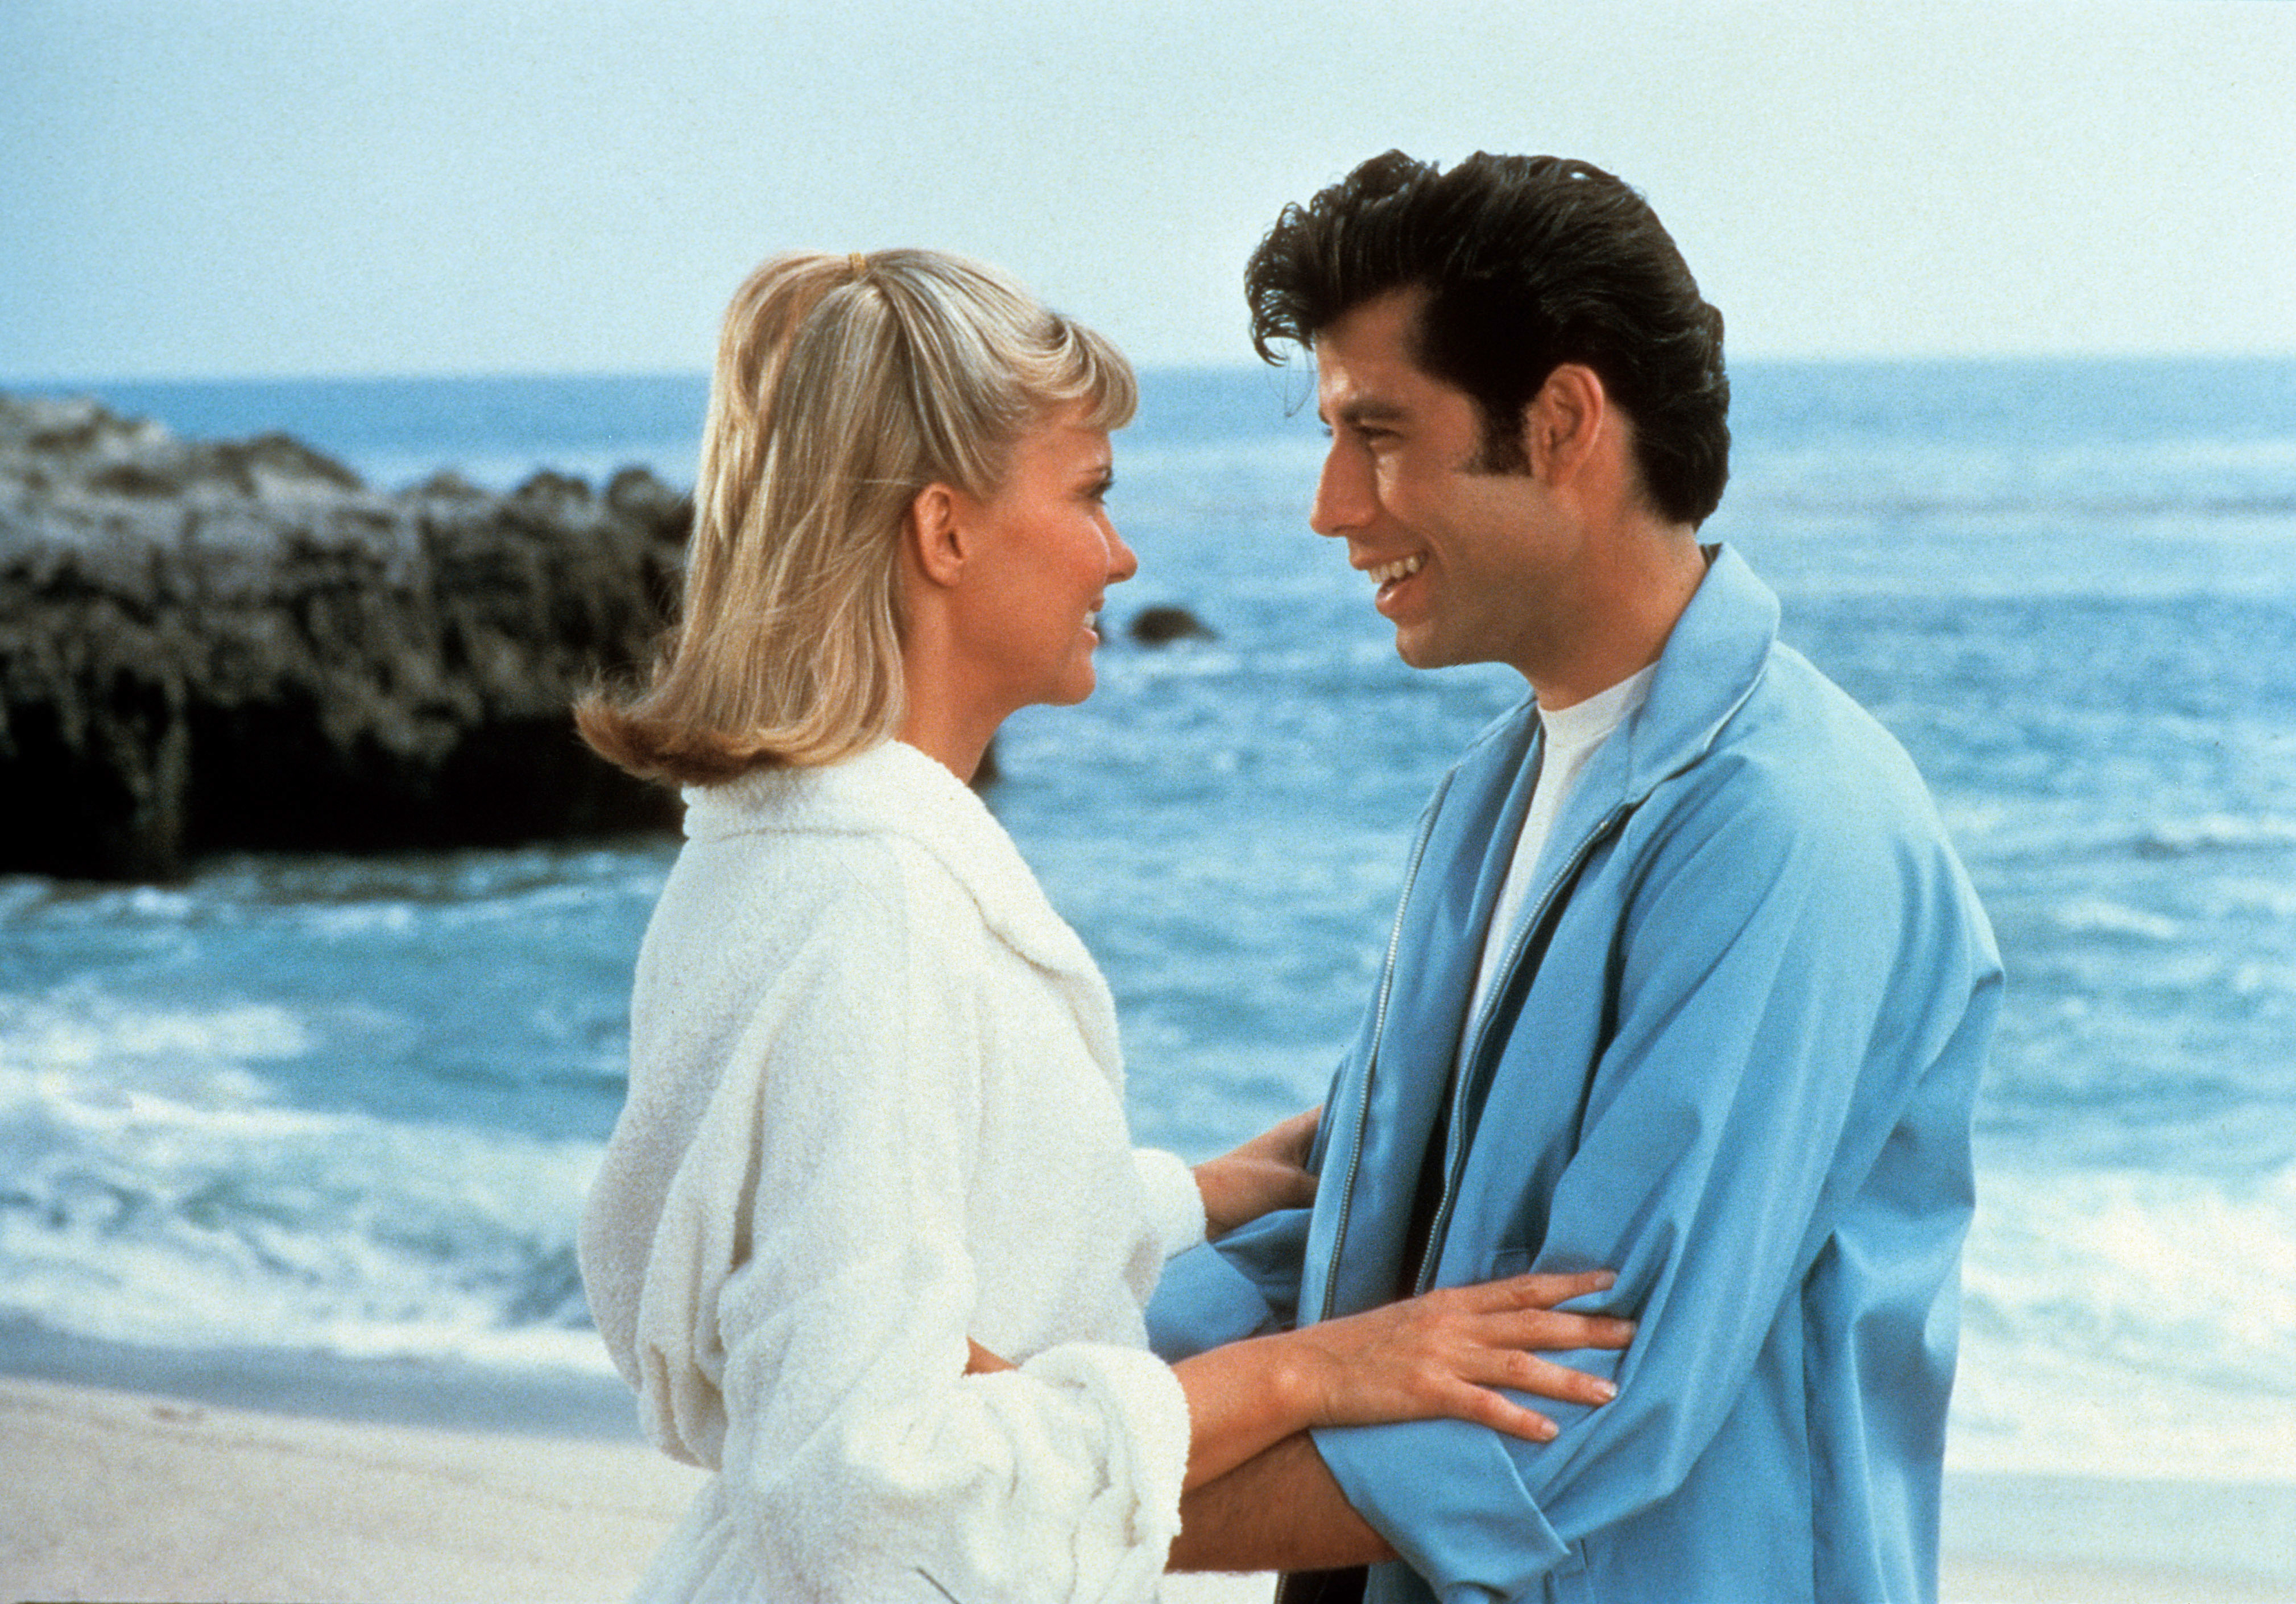 Olivia Newton-John and John Travolta embrace on a beach, smiling at each other, in a scene from the movie &quot;Grease.&quot;